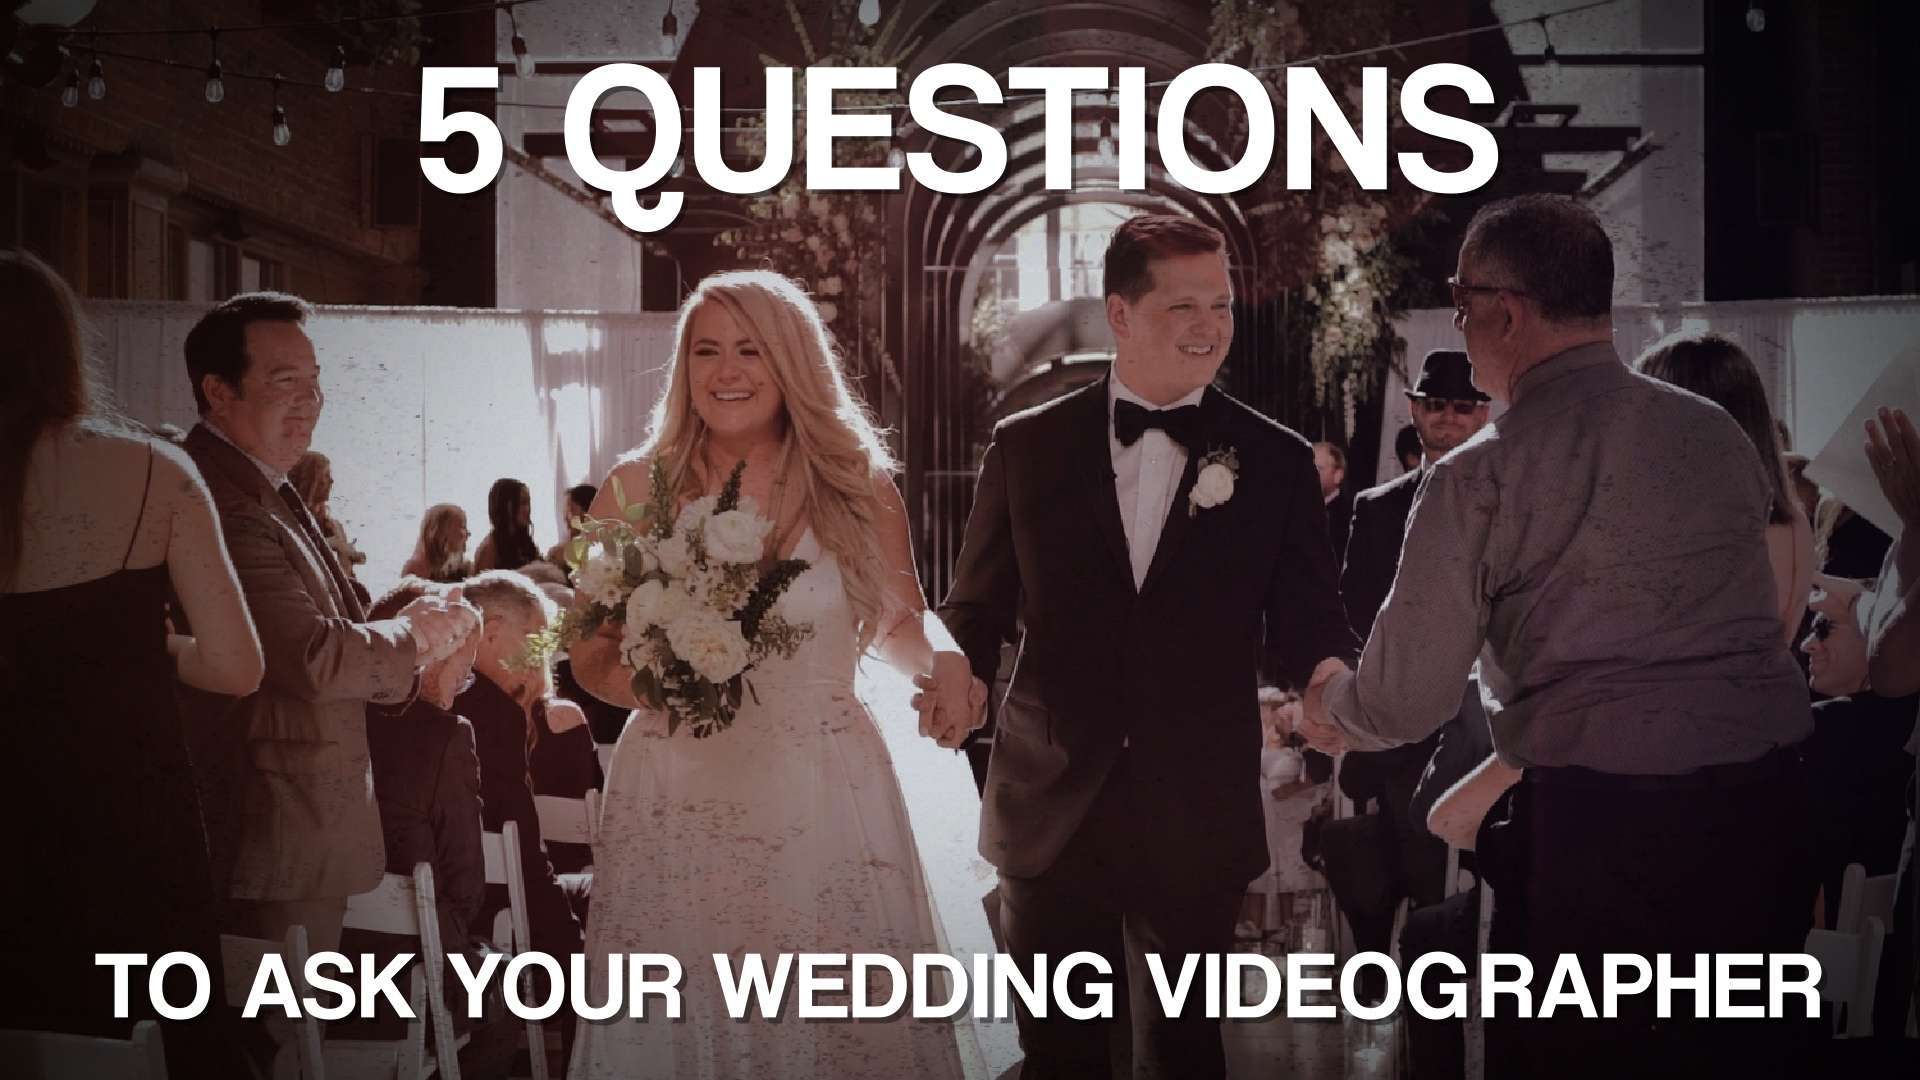 What to ask my wedding videographer